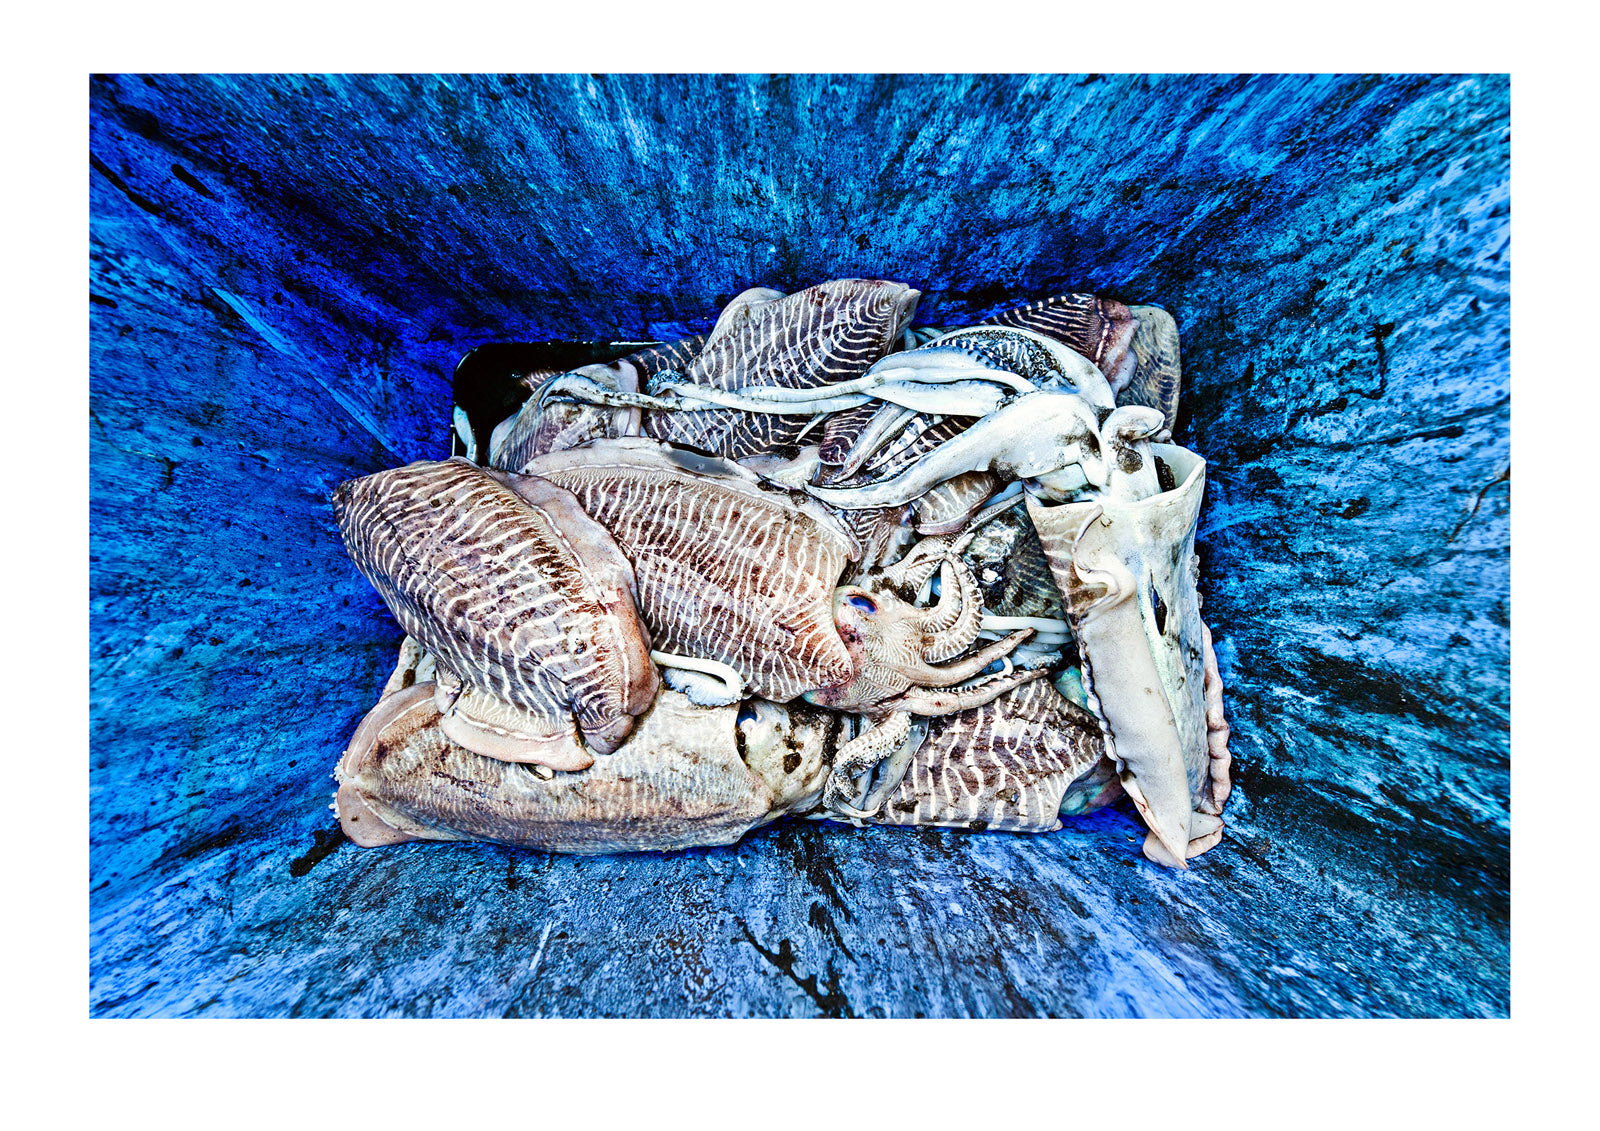 The delicate tendrils and elegant mosaic skin patterns on a catch of Cuttlefish framed by a weathered old tub in a fish market.Mutrah Fish Market, Muscat, Oman.